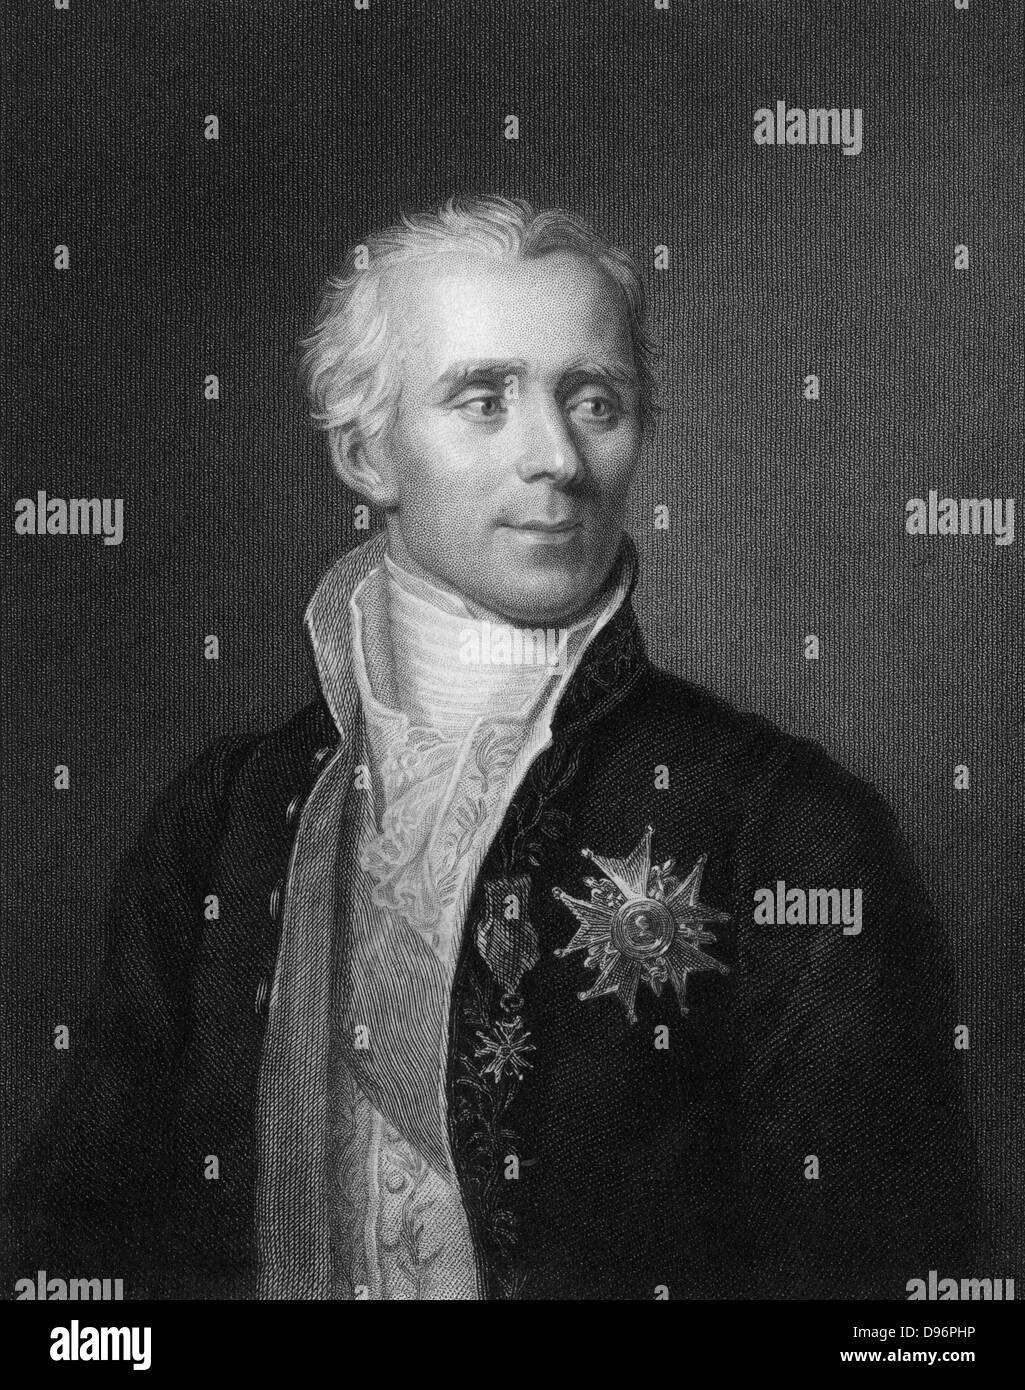 Pierre Simon Laplace (1749-1827), French mathematician and astronomer. [1833]. His five volume 'Mecanique celeste' 1799-1825 was the greatest work on celestial mechanics since Newton's 'Principia'. From 'The Gallery of Portraits', Vol. II, by Charles Knigght (London, 1833). Stock Photo